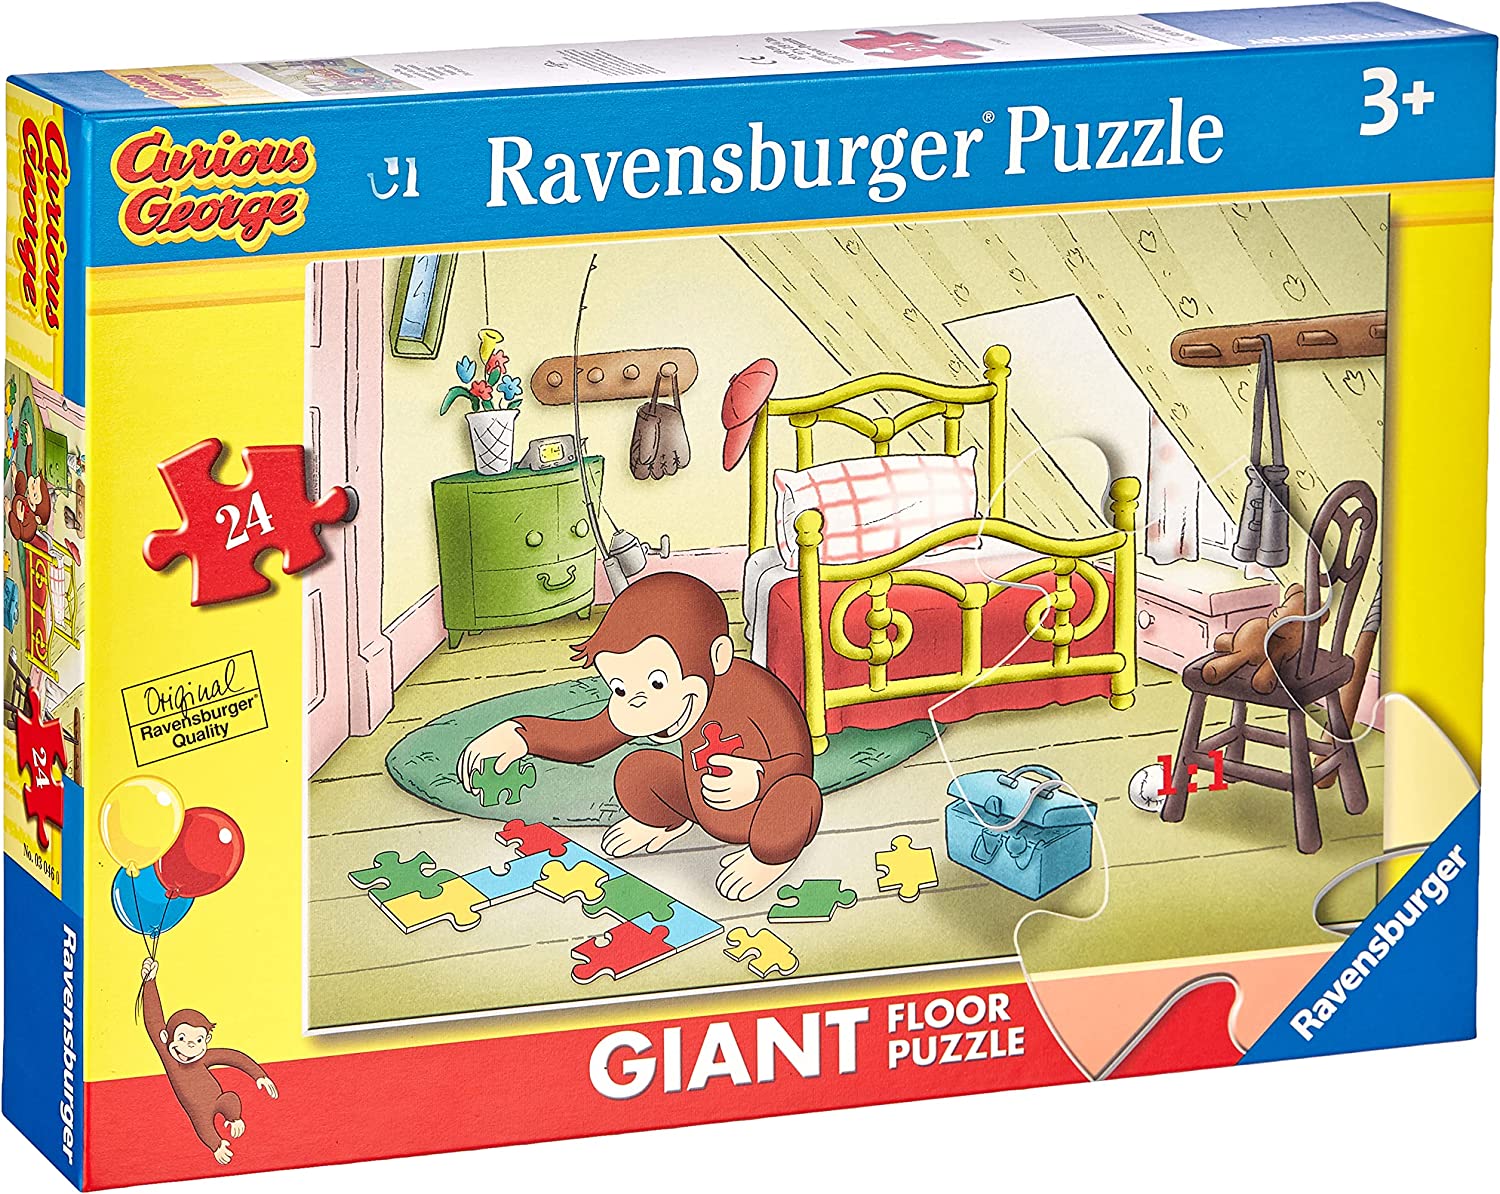 Giant Floor Puzzle - XXL Pieces - George Ravensburger-03046 24 pieces  Jigsaw Puzzles - Animals in comics and cartoons - Jigsaw Puzzle